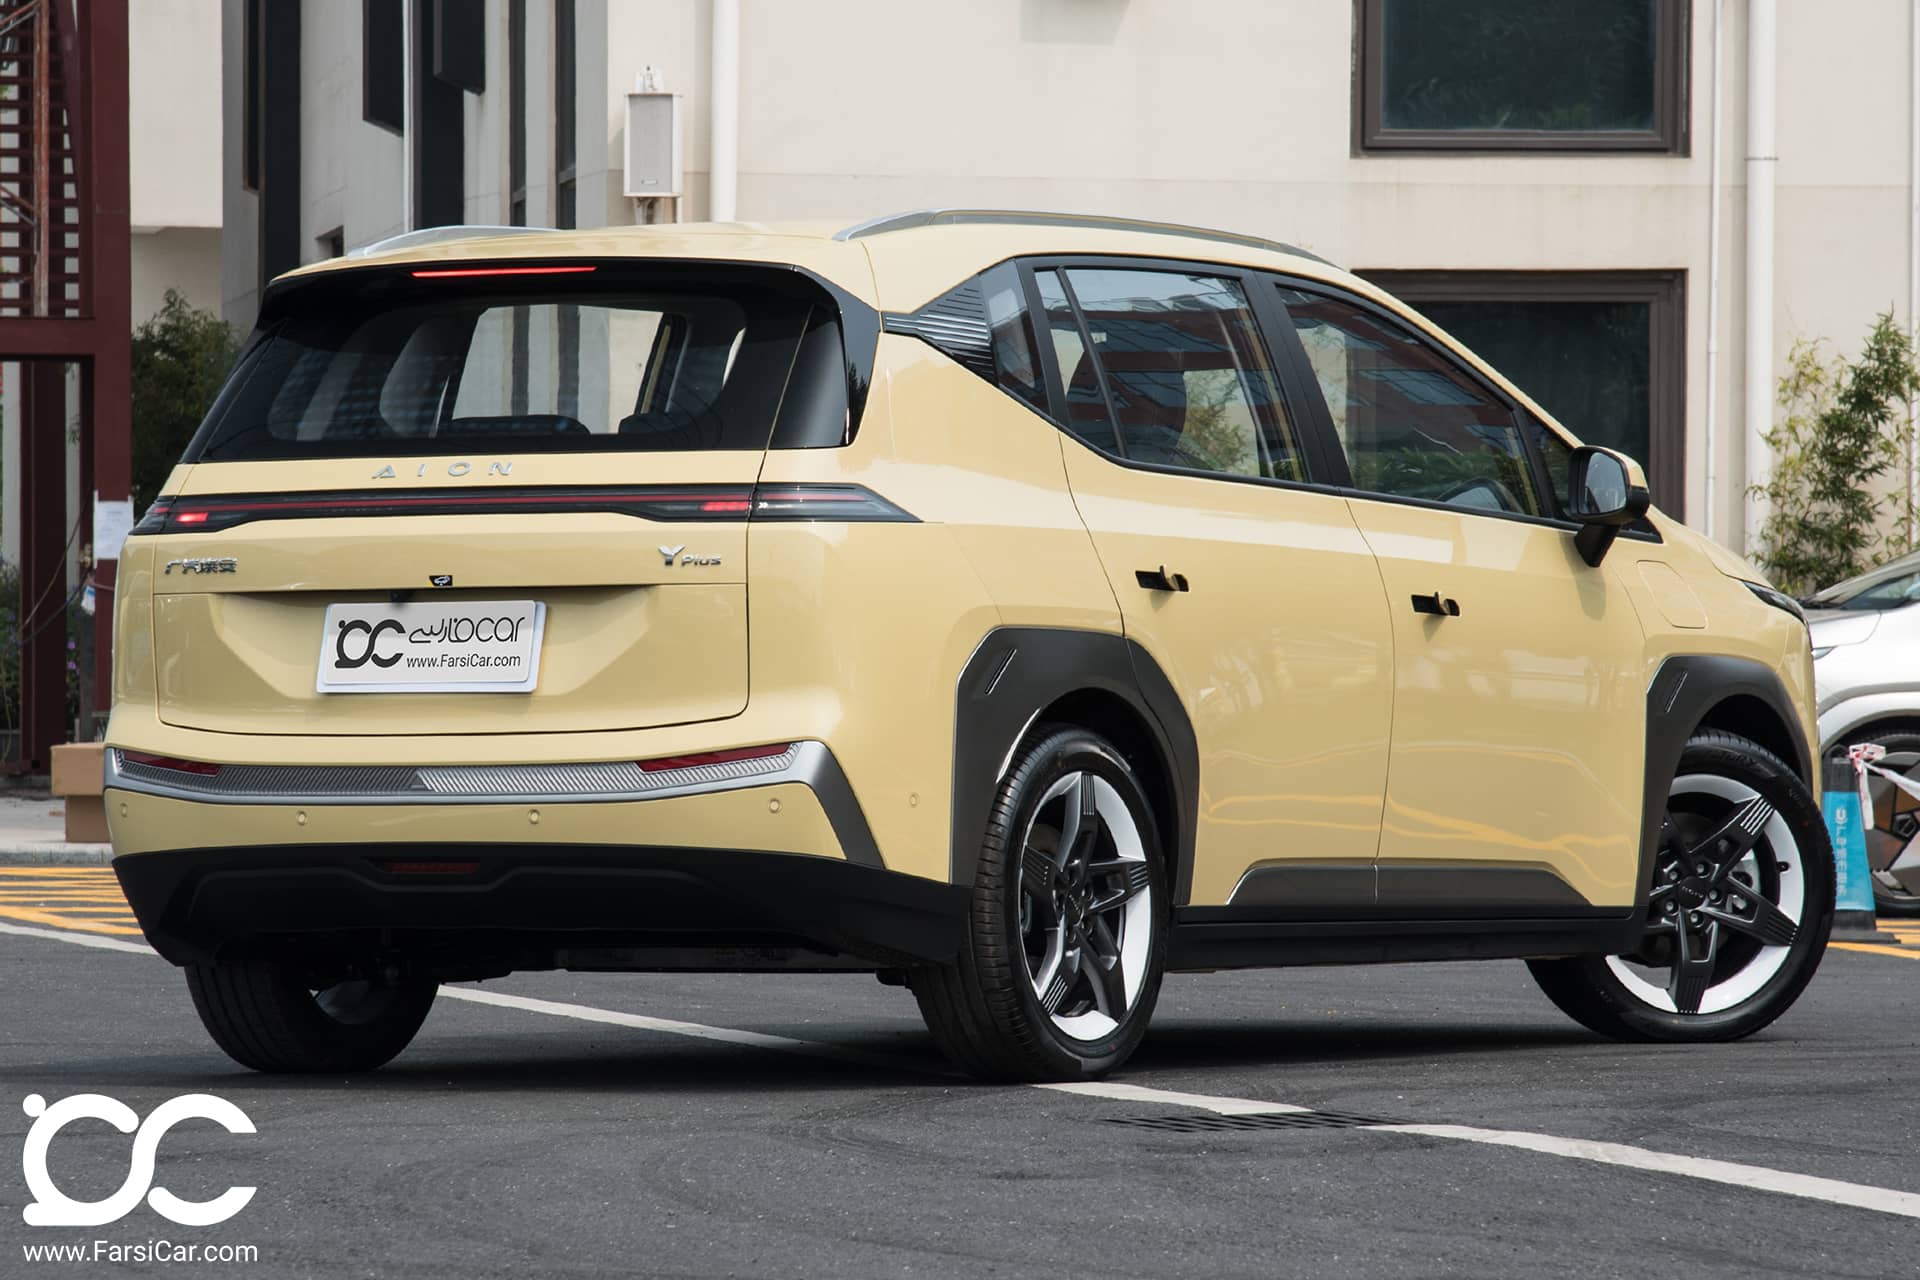 The All-New 2023 GAC AION Y Plus Electric MPV